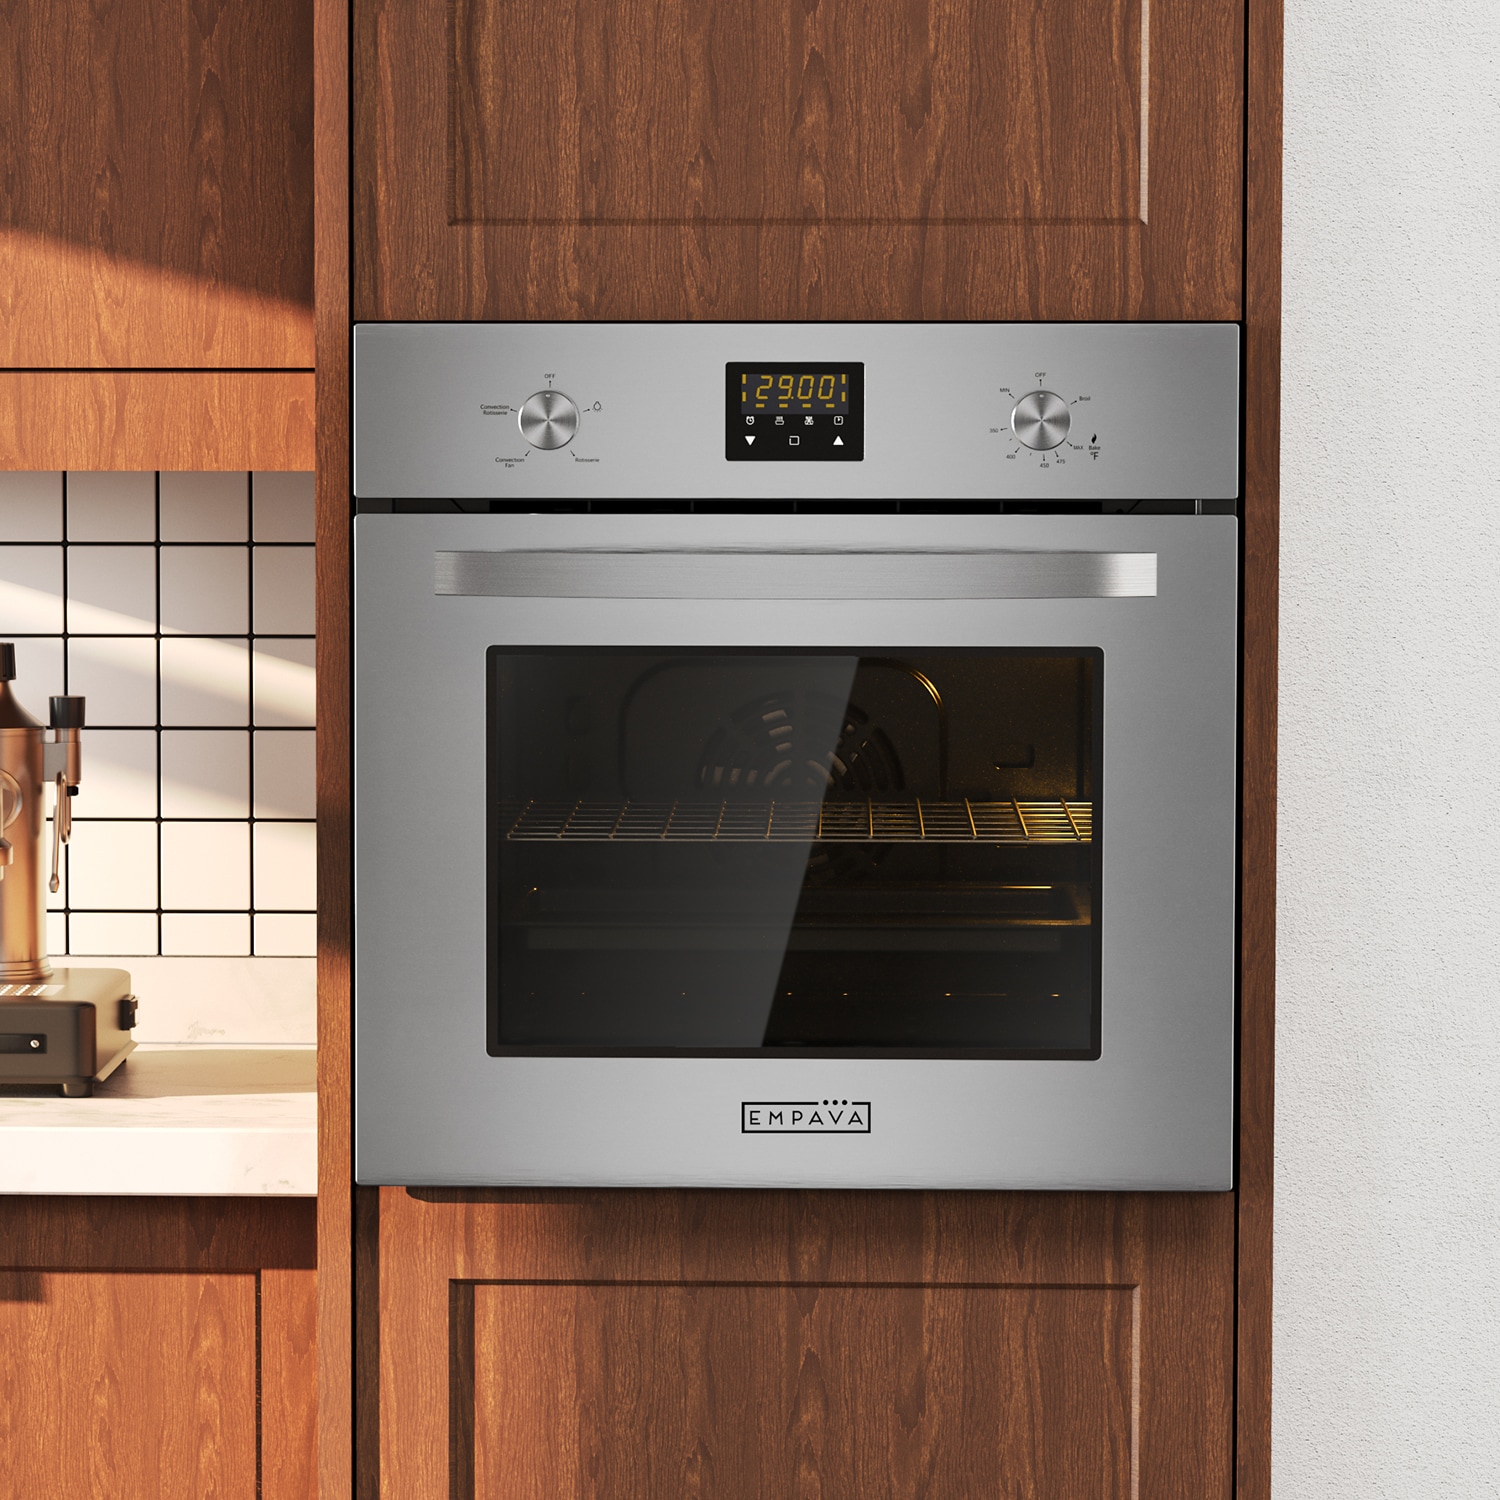 Choosing the Best 24-Inch Wall Oven: Our Top 5 Picks Reviewed